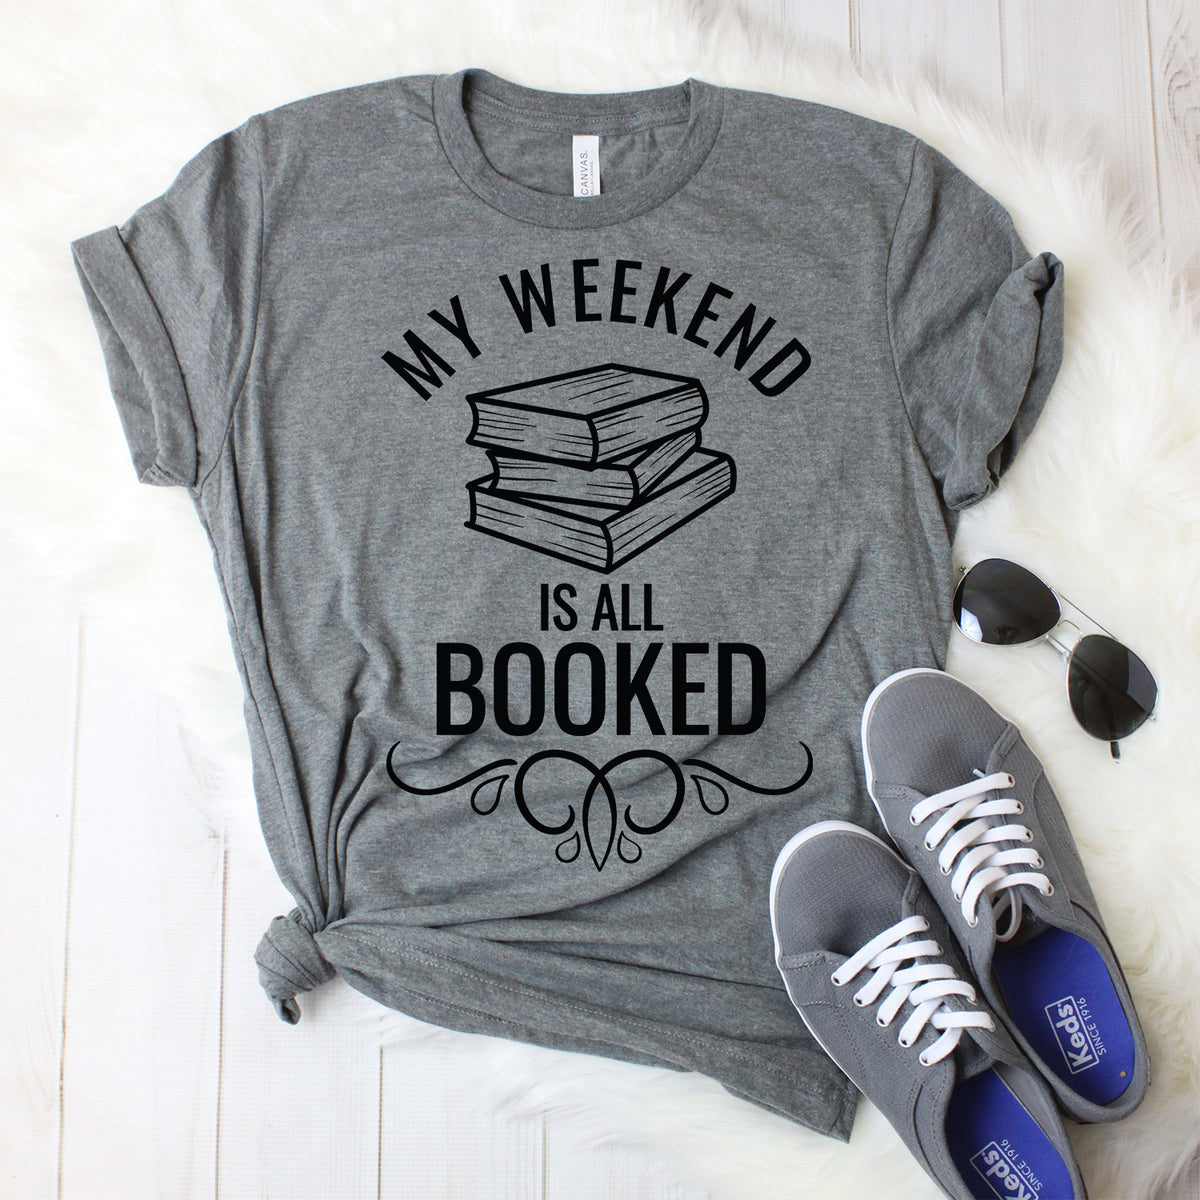 My Weekend is All Booked T-Shirt